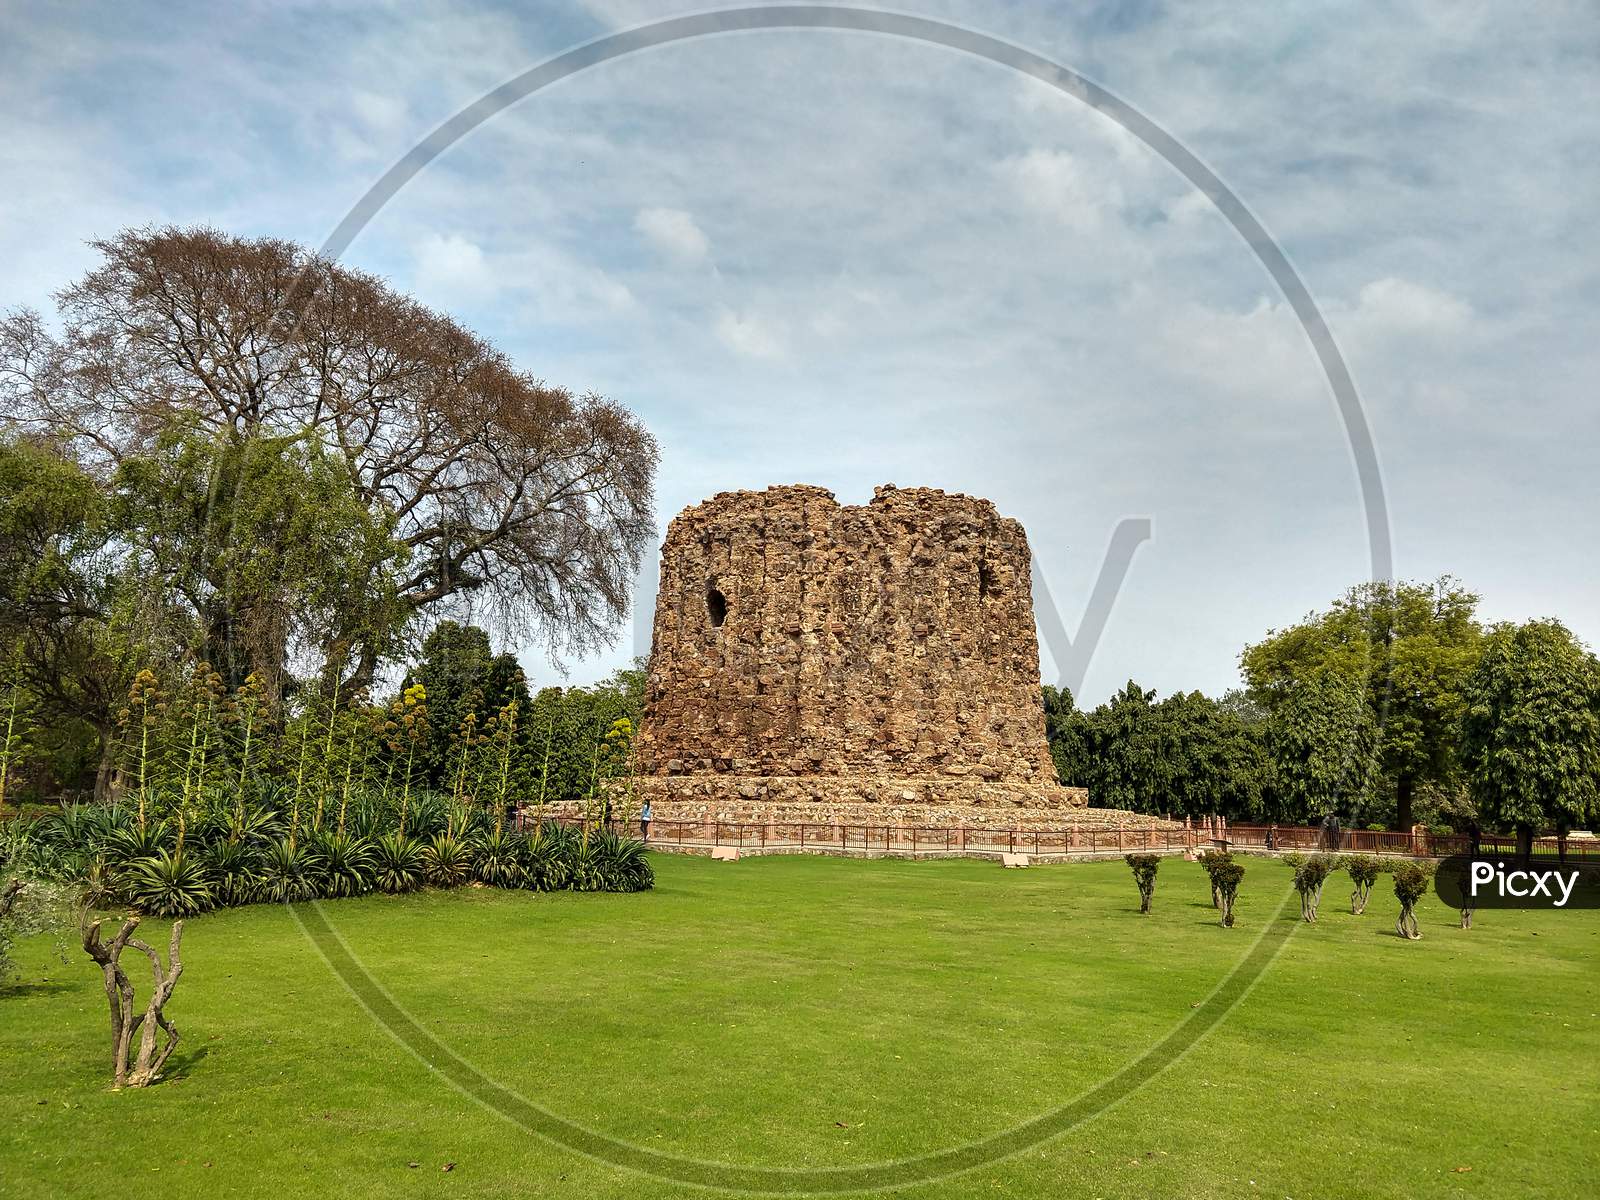 The remains of Alauddin Kilji's Alai Minar at Qutub Minar complex. Unfinished 1-story tower built during the Khalji dynasty to commemorate military victories.